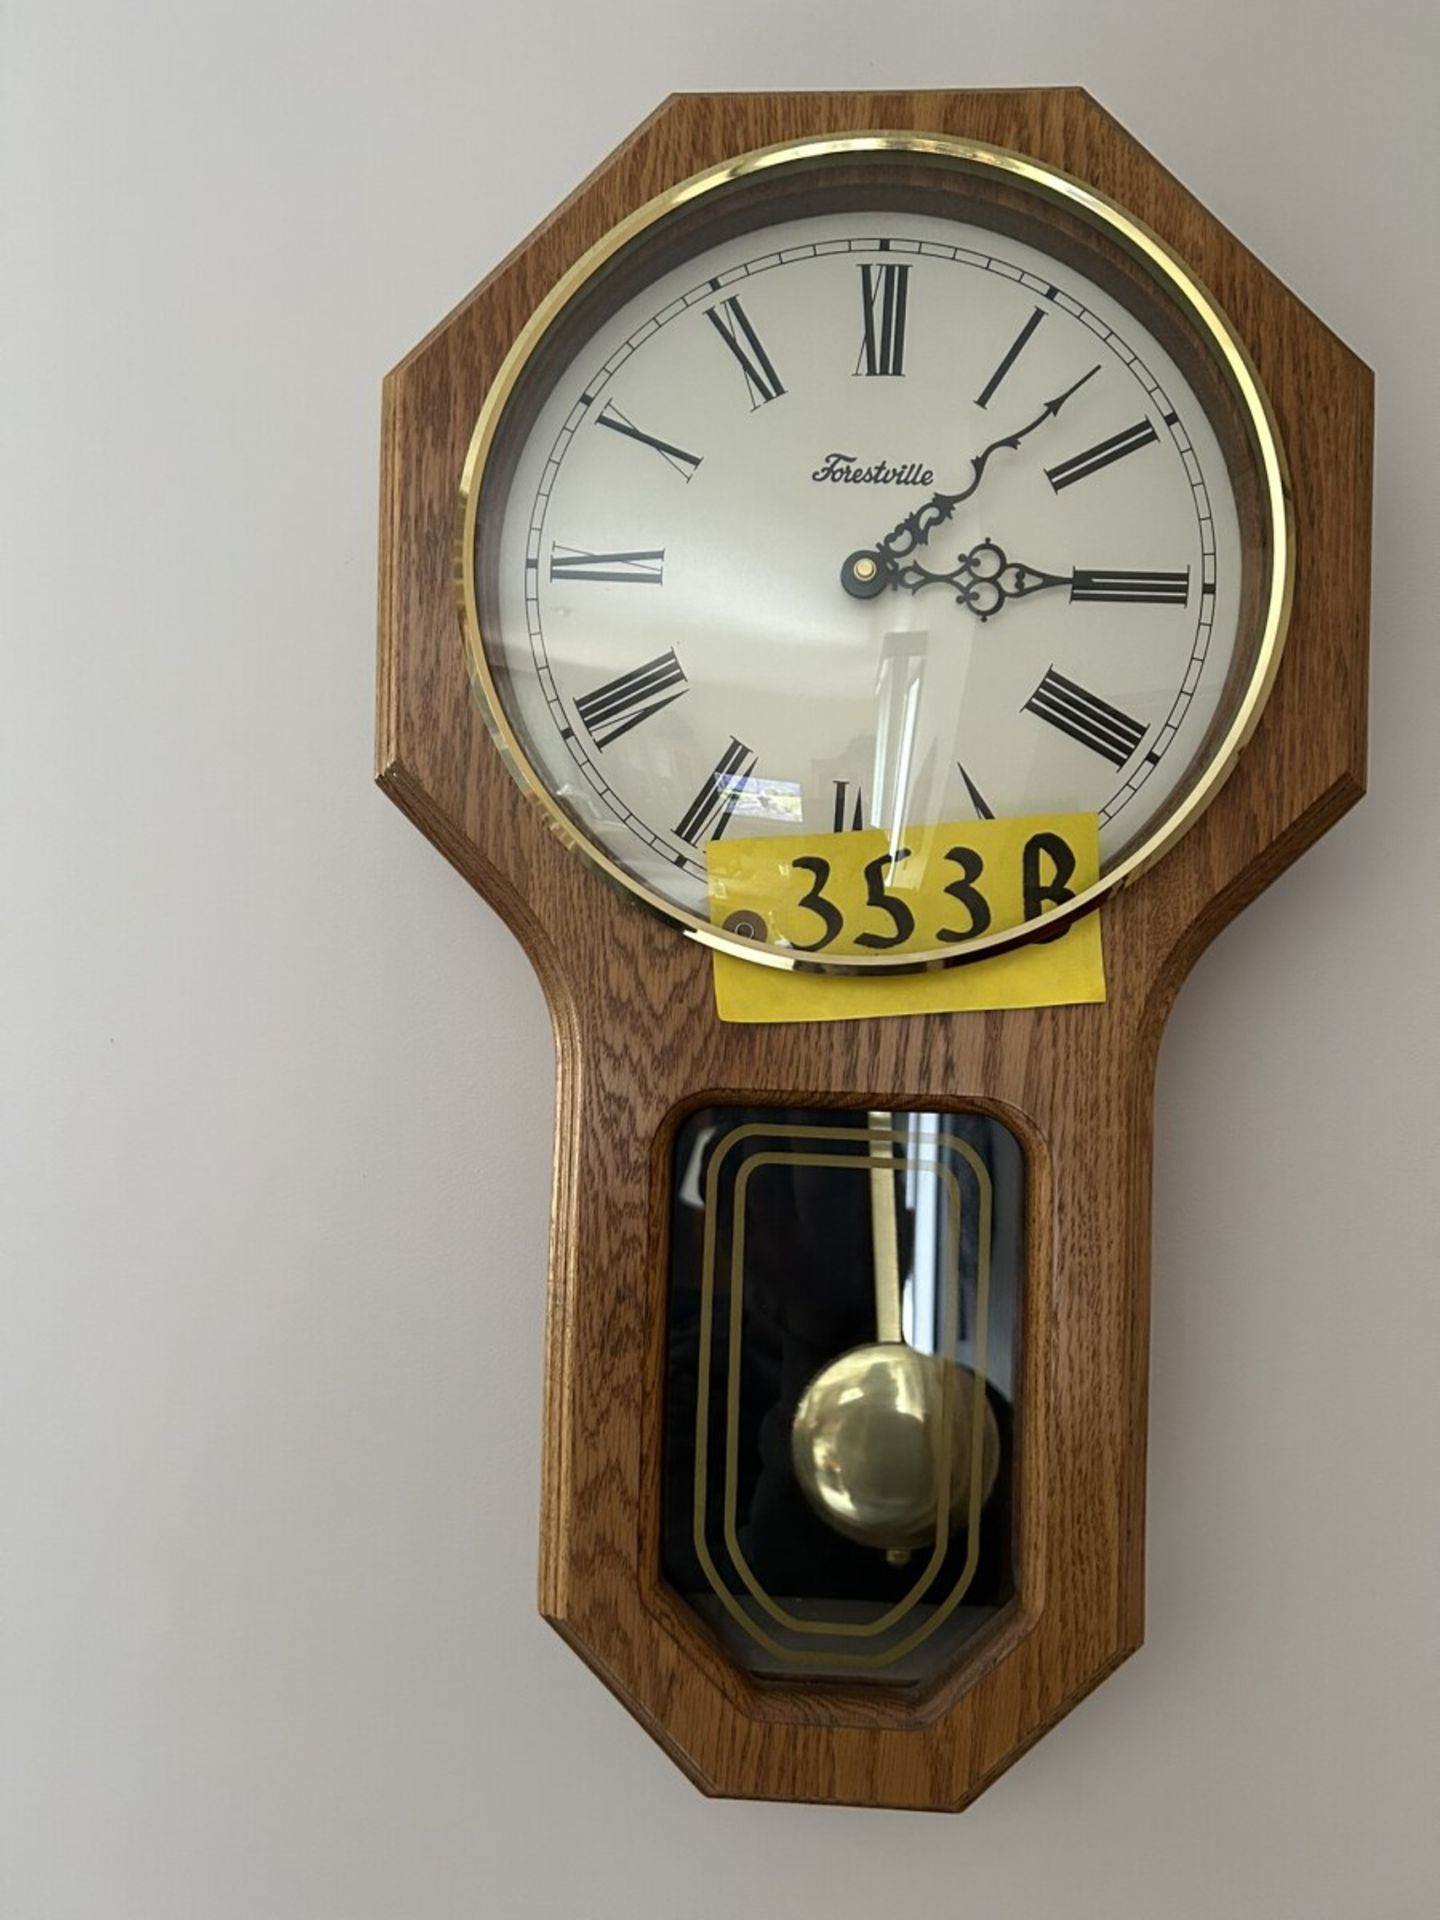 FORESTRILLE HANGING WALL CLOCK